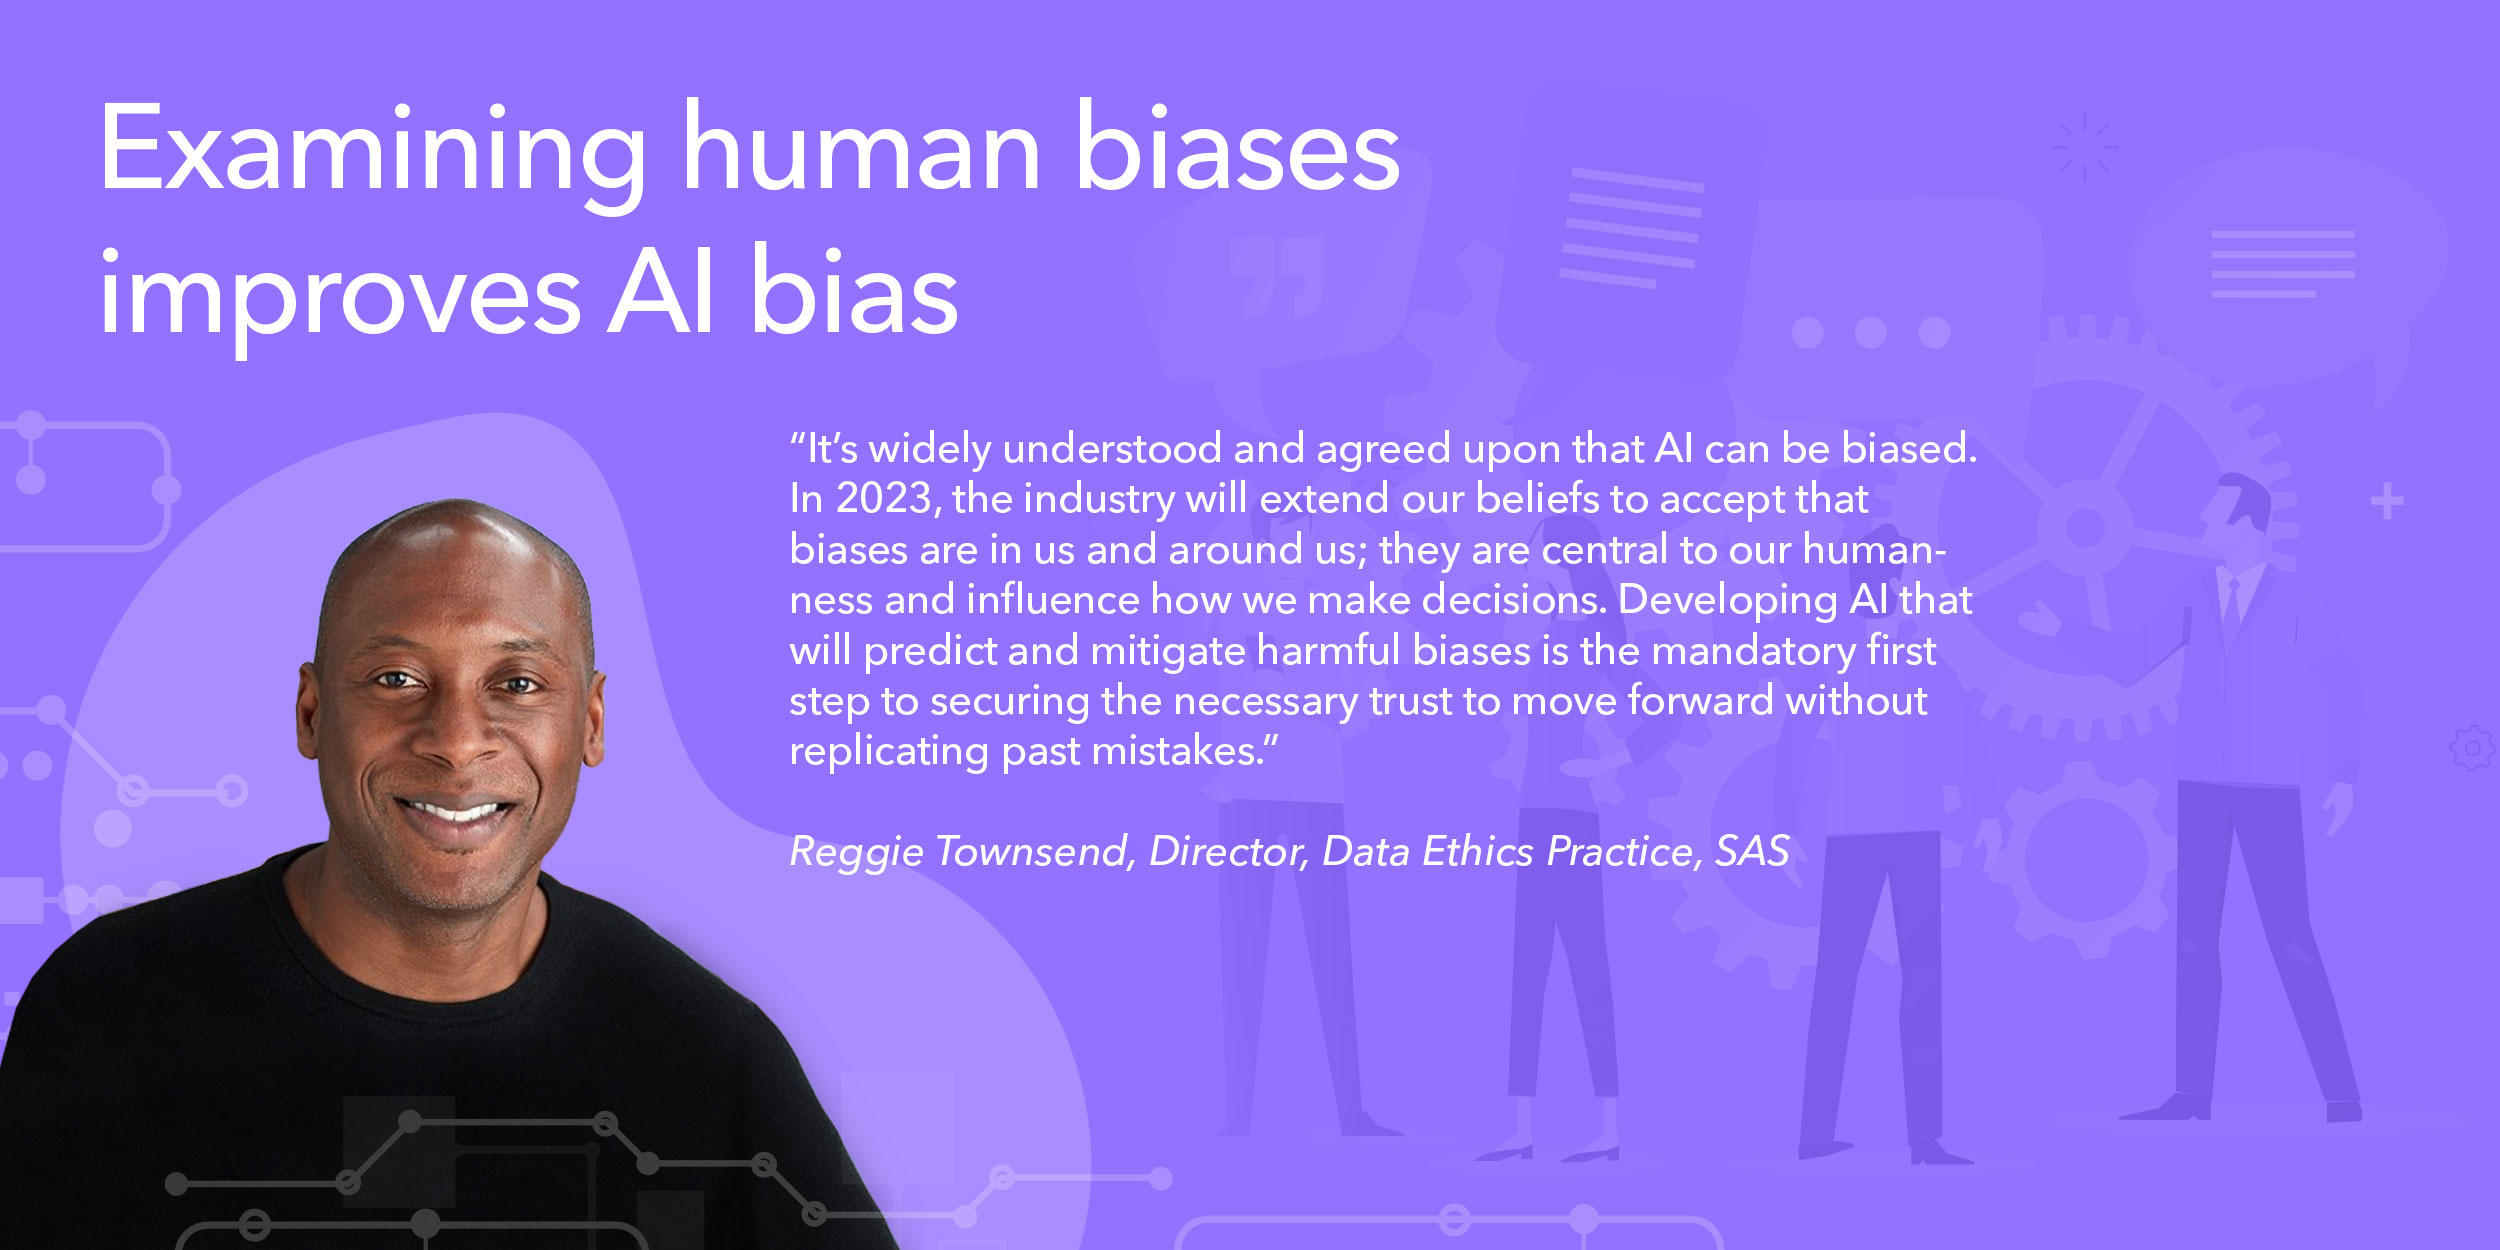 It’s widely understood and agreed upon that AI can be biased. In 2023, the industry will extend our beliefs to accept that biases are in us and around us; they are central to our humanness and influence how we make decisions. Developing AI that predicts and mitigates harmful biases is the first step to securing the necessary trust to move forward without replicating past mistakes. 